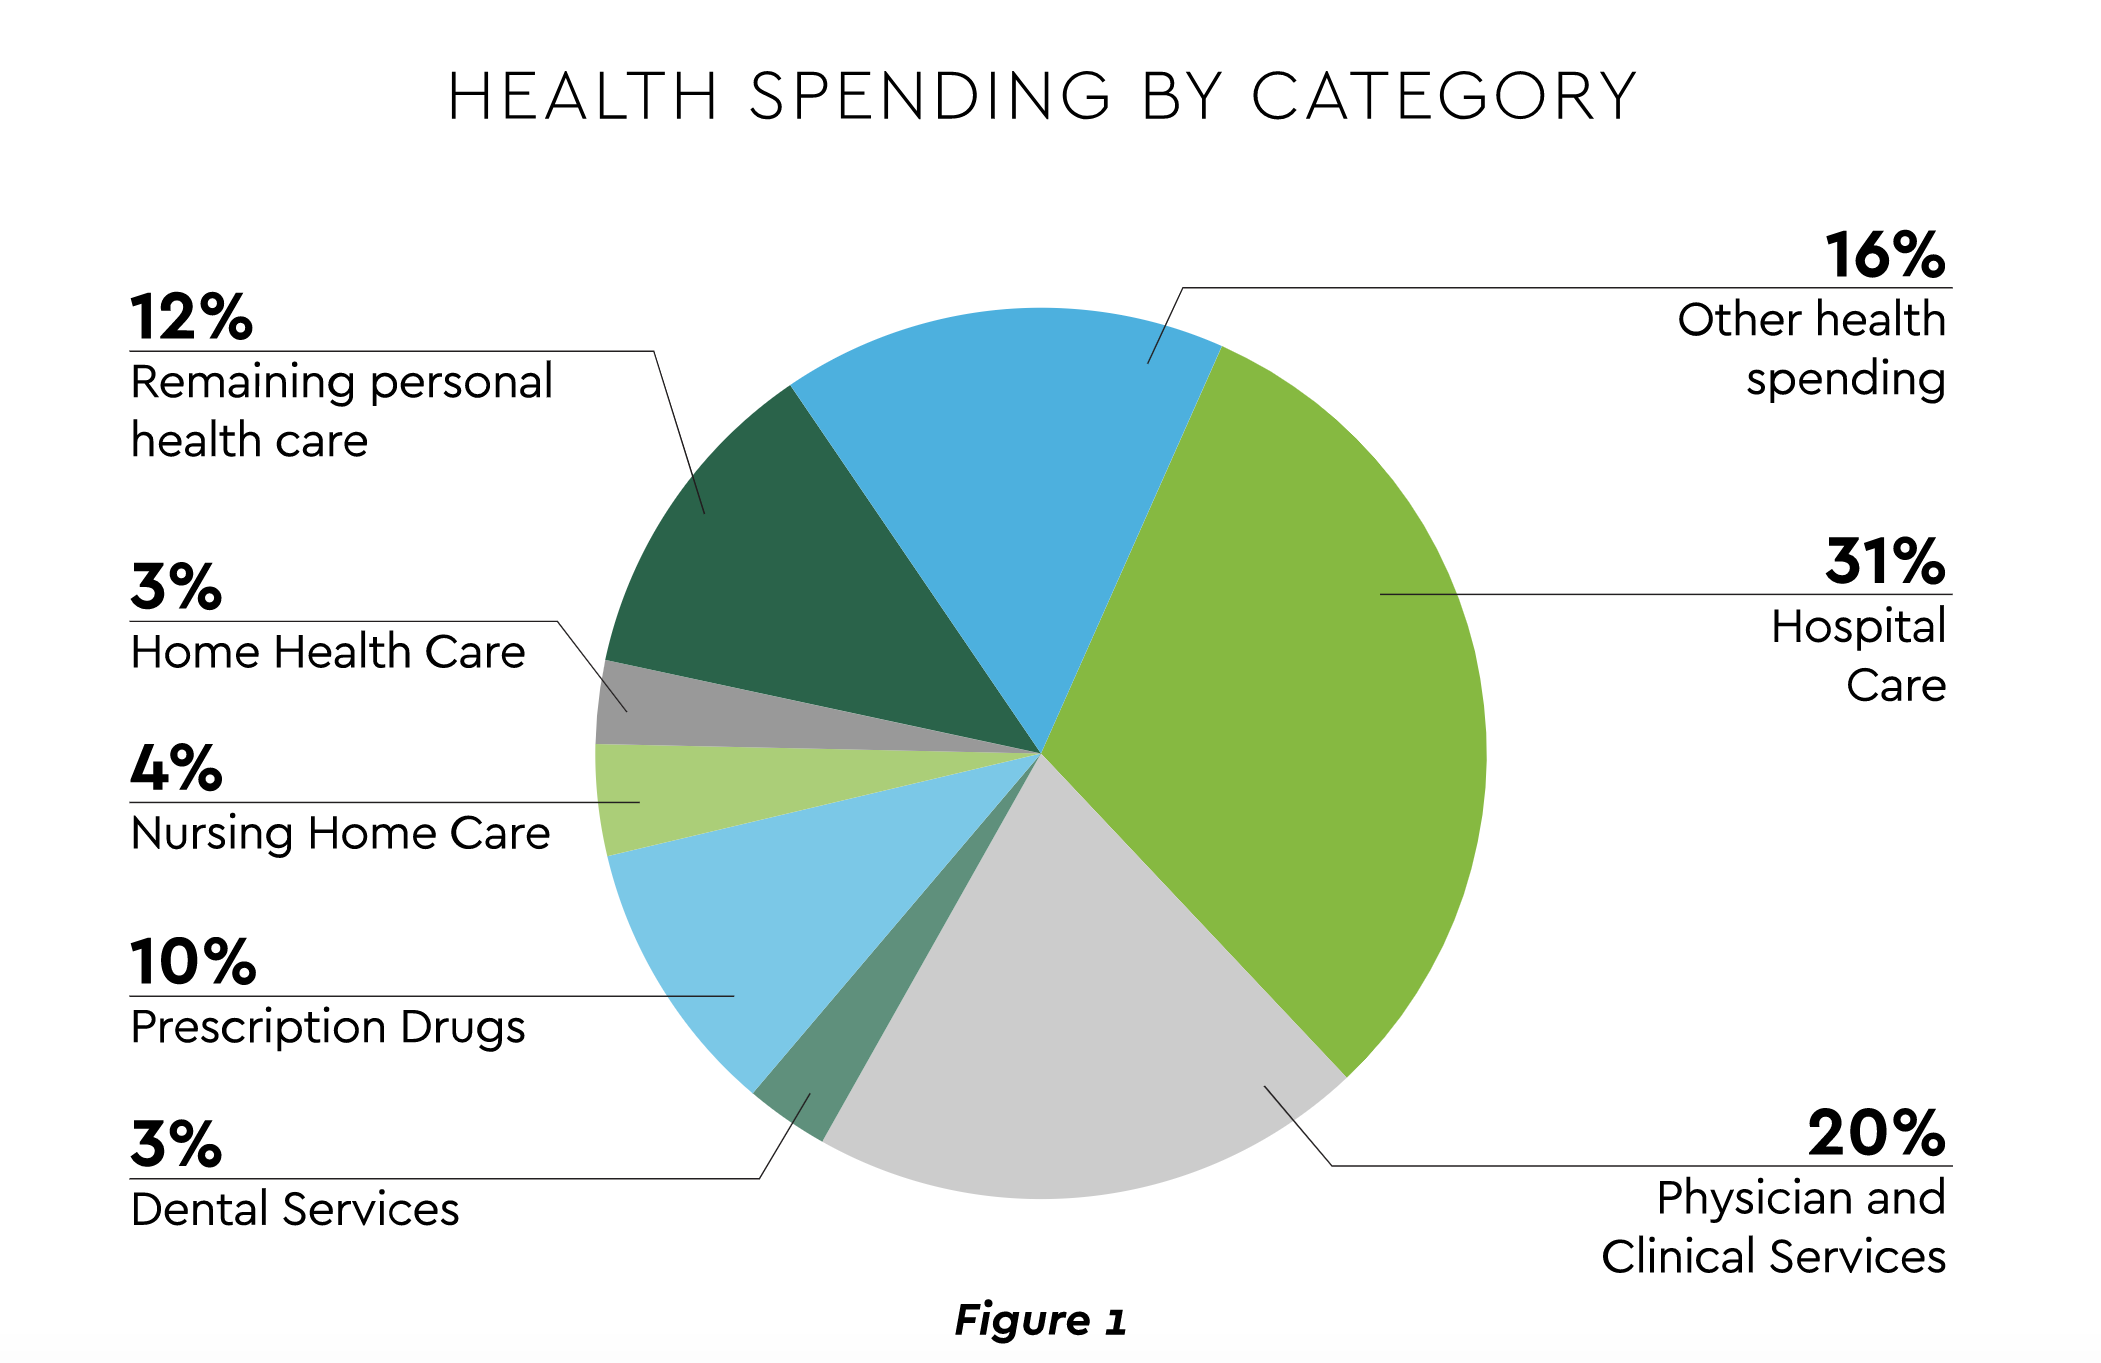 Health spending by category